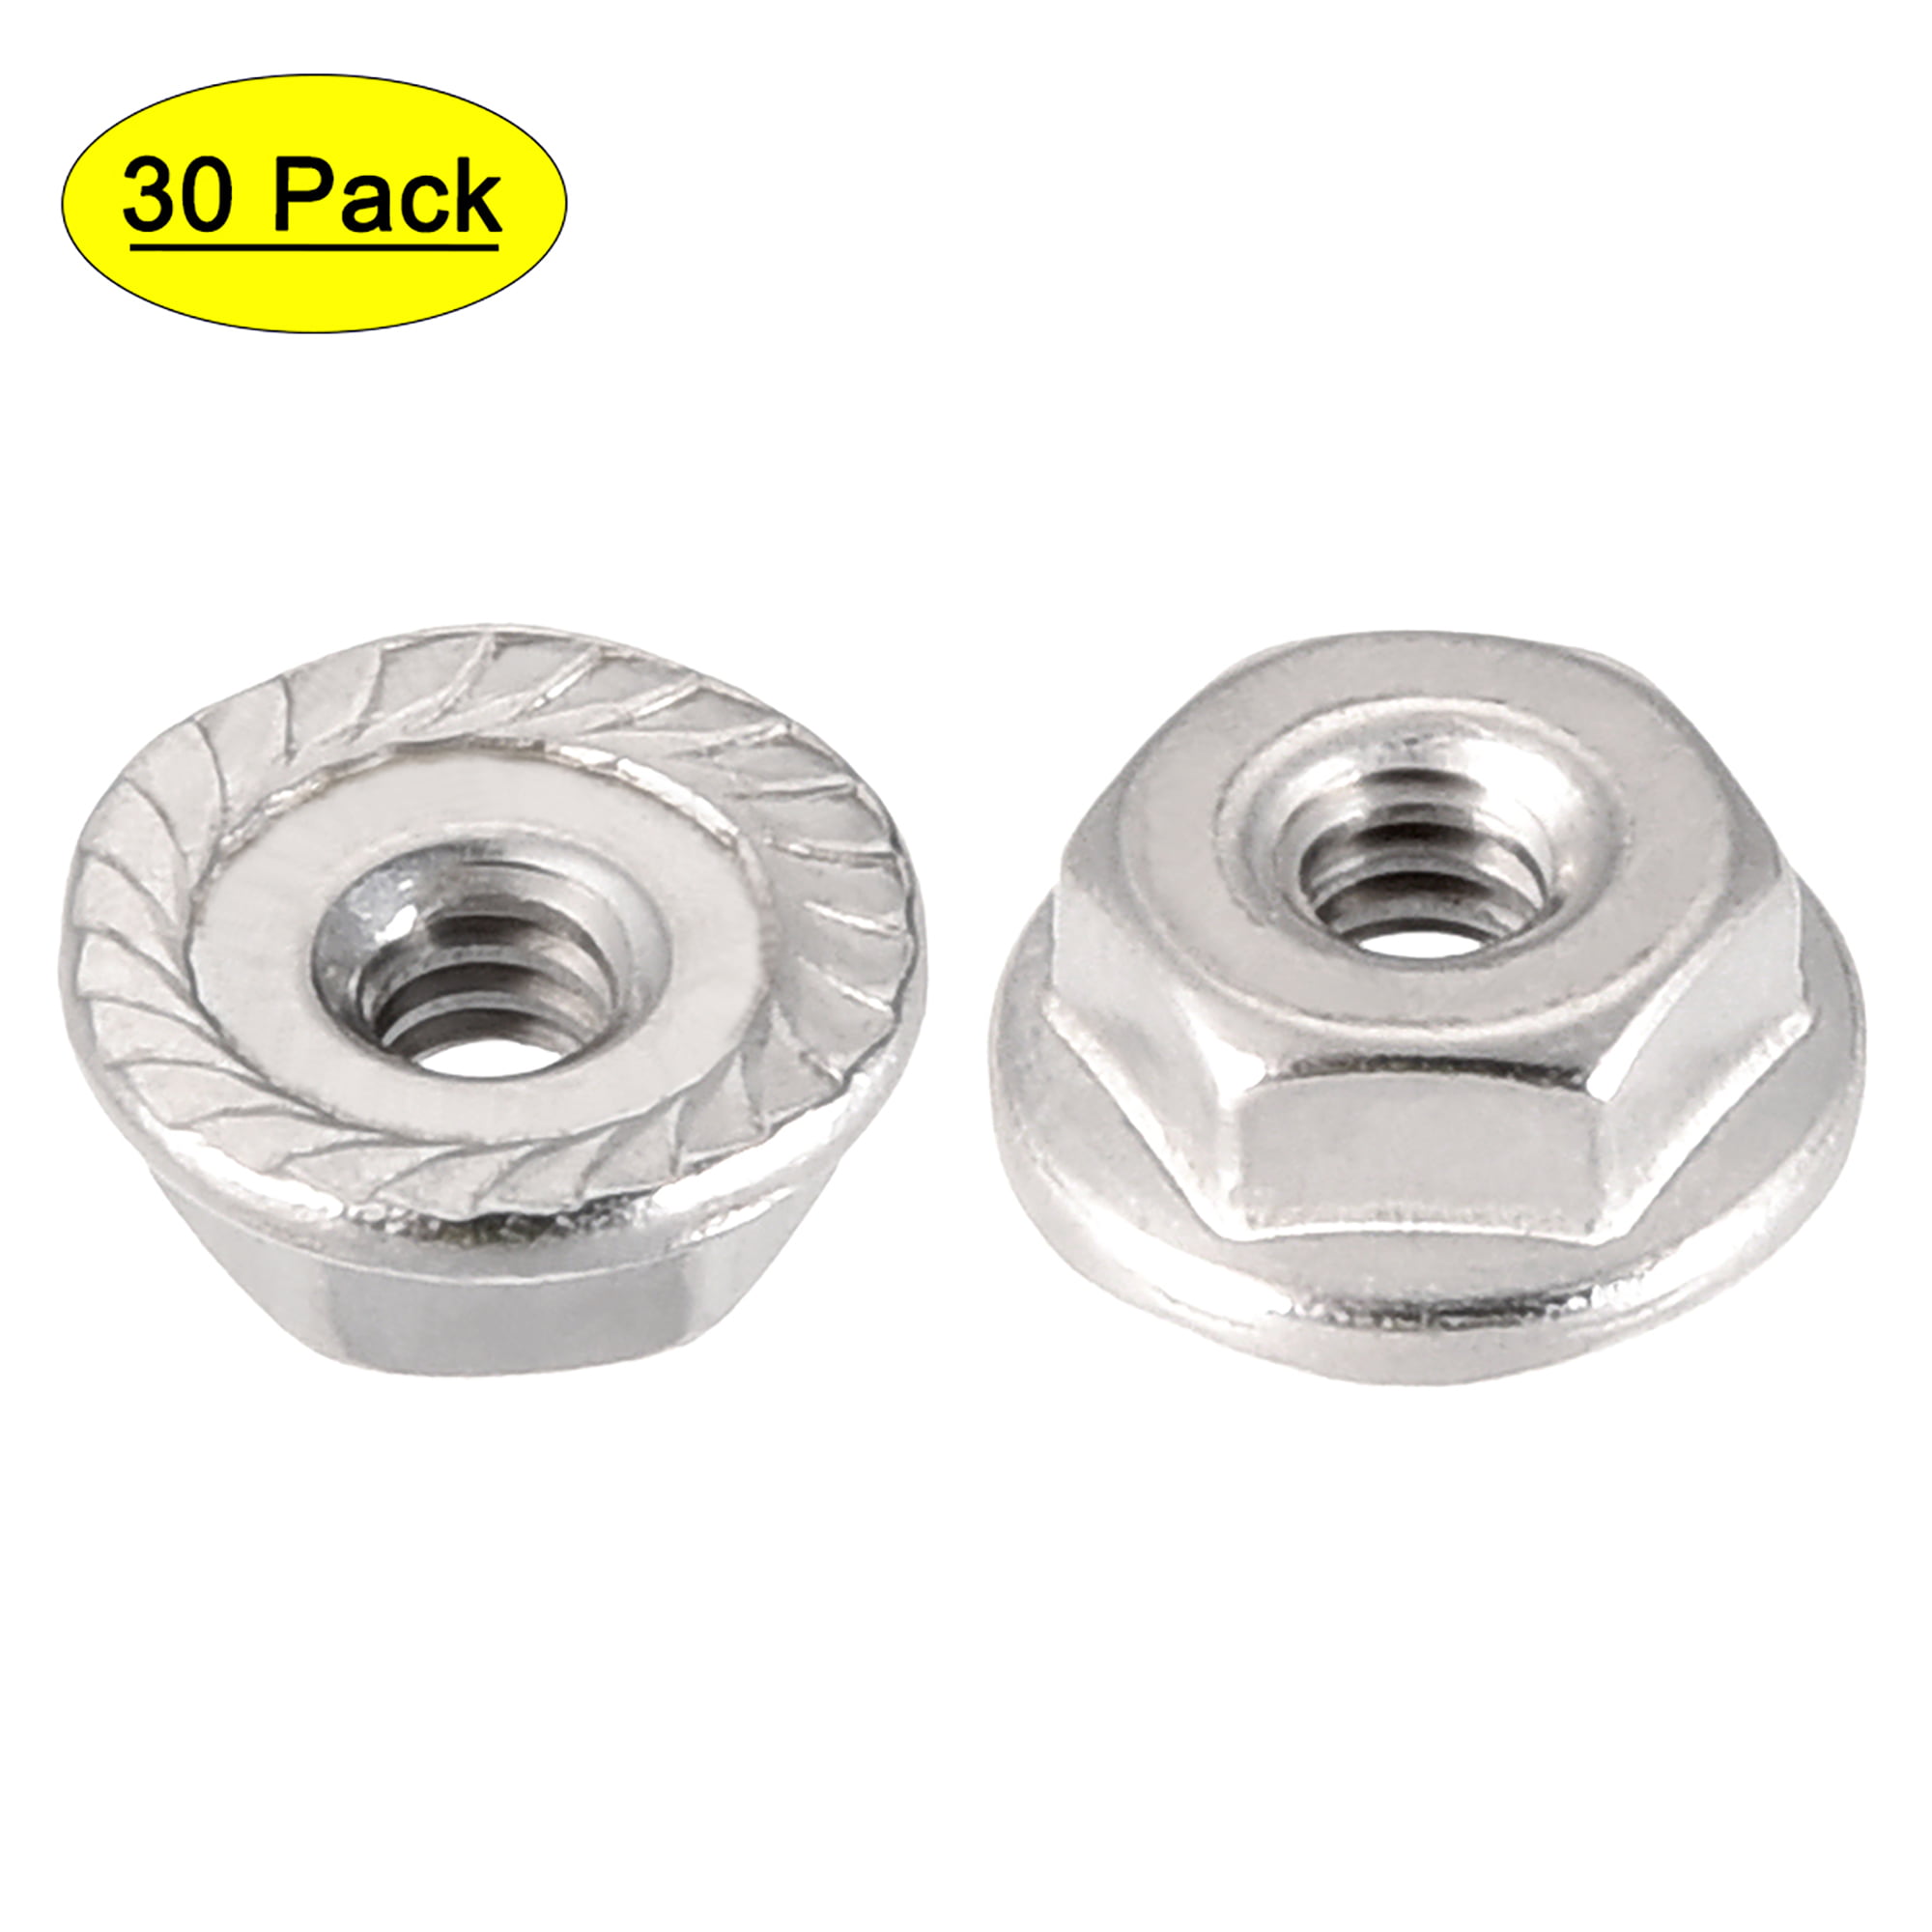 50 6/32 Steel Hex Nut Zinc Plated Made in USA 